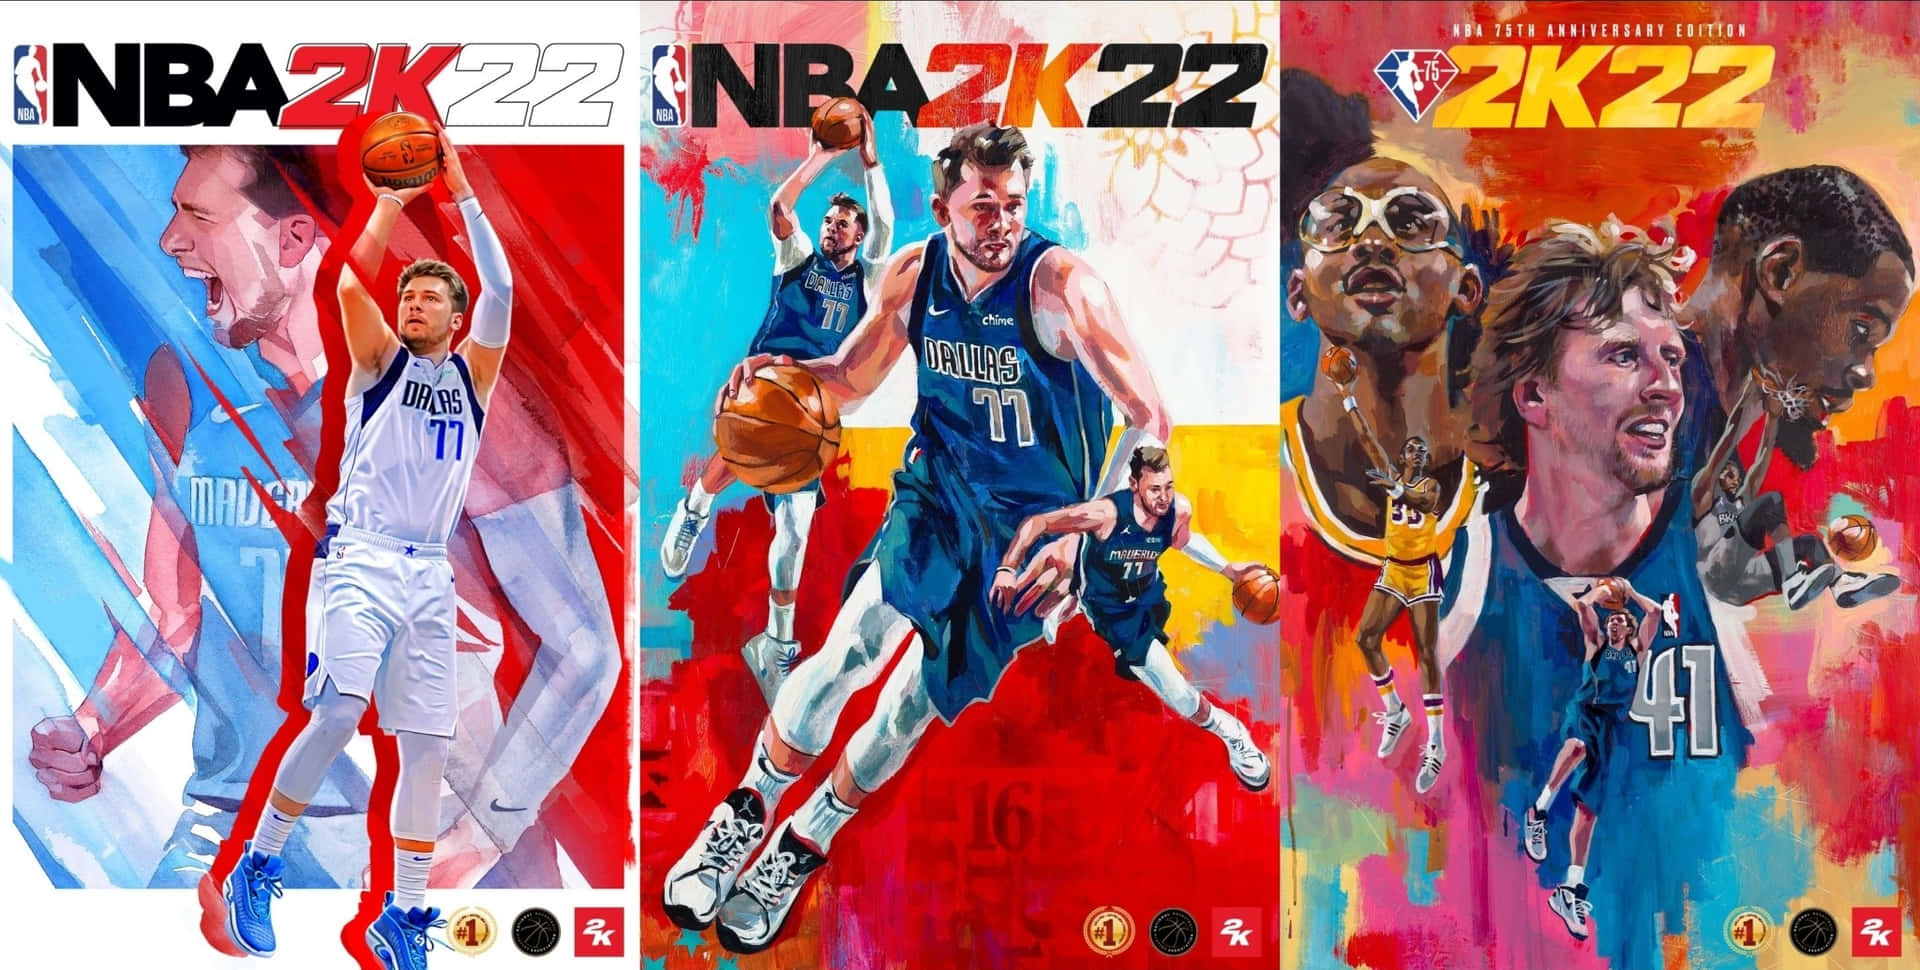 Get hyped for the release of NBA 2K22! Wallpaper